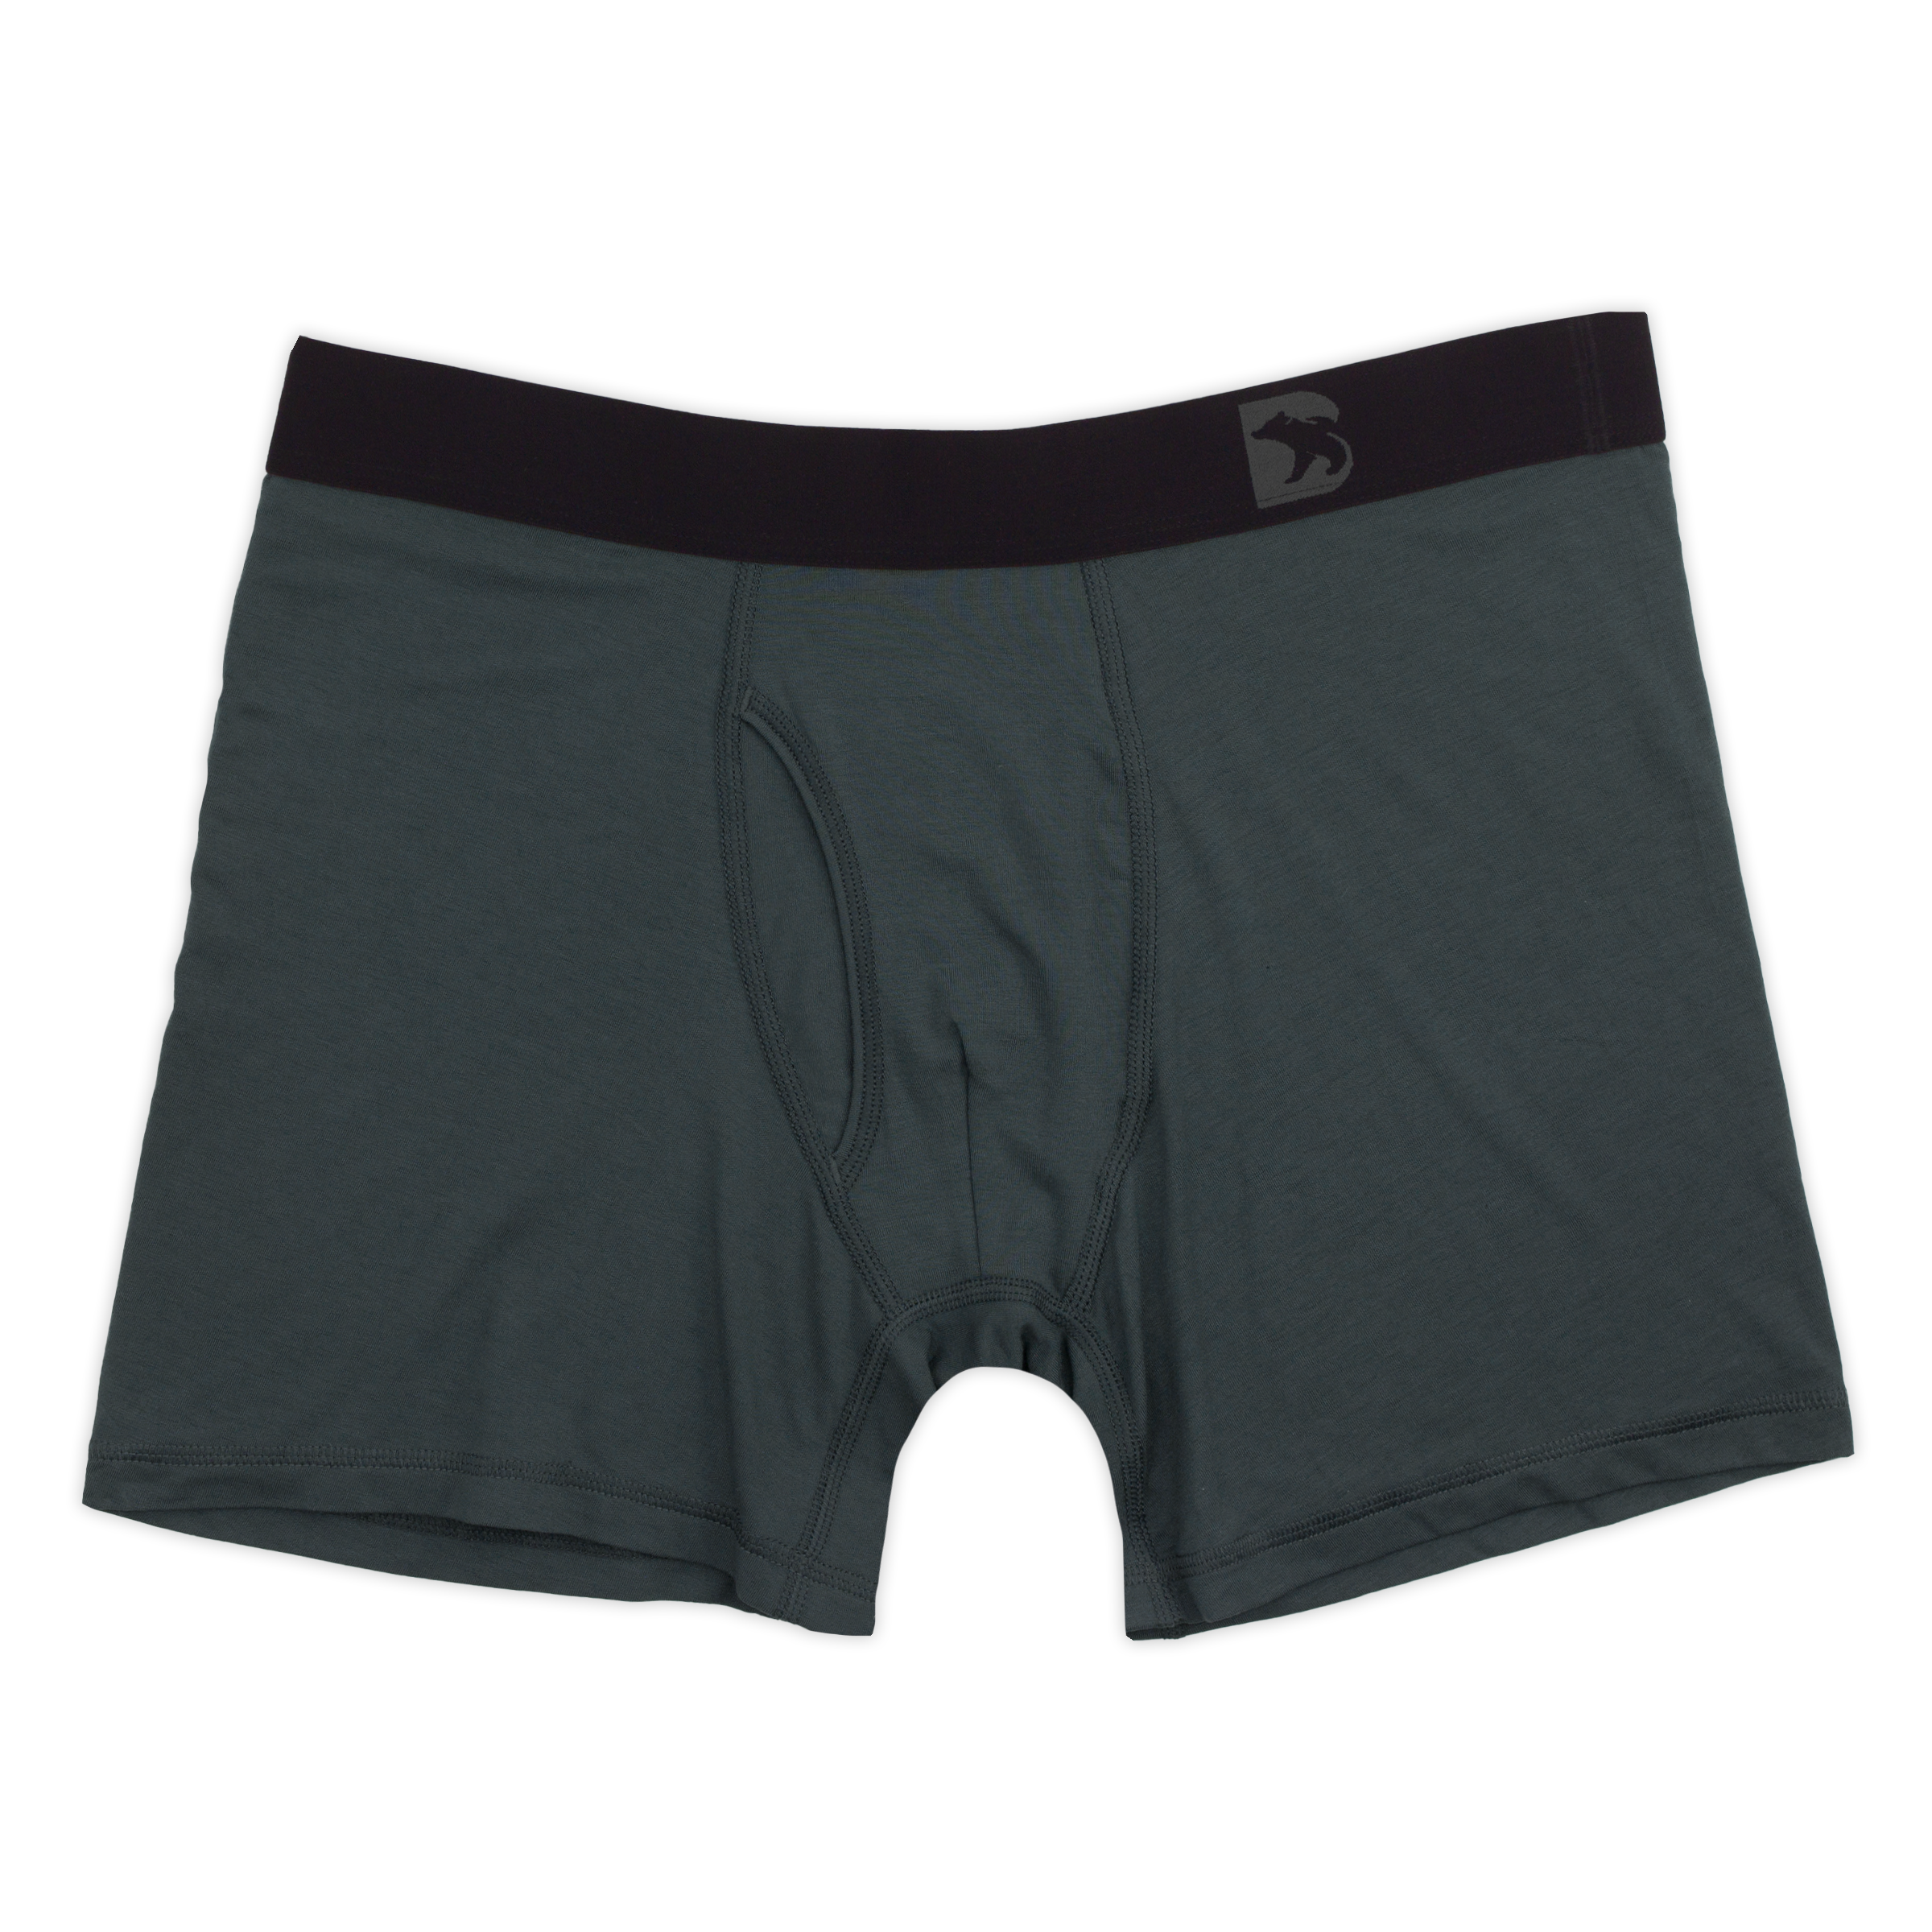 Modal Boxer Brief in Coal grey with elastic waistband with Bearbottom B logo and functional fly